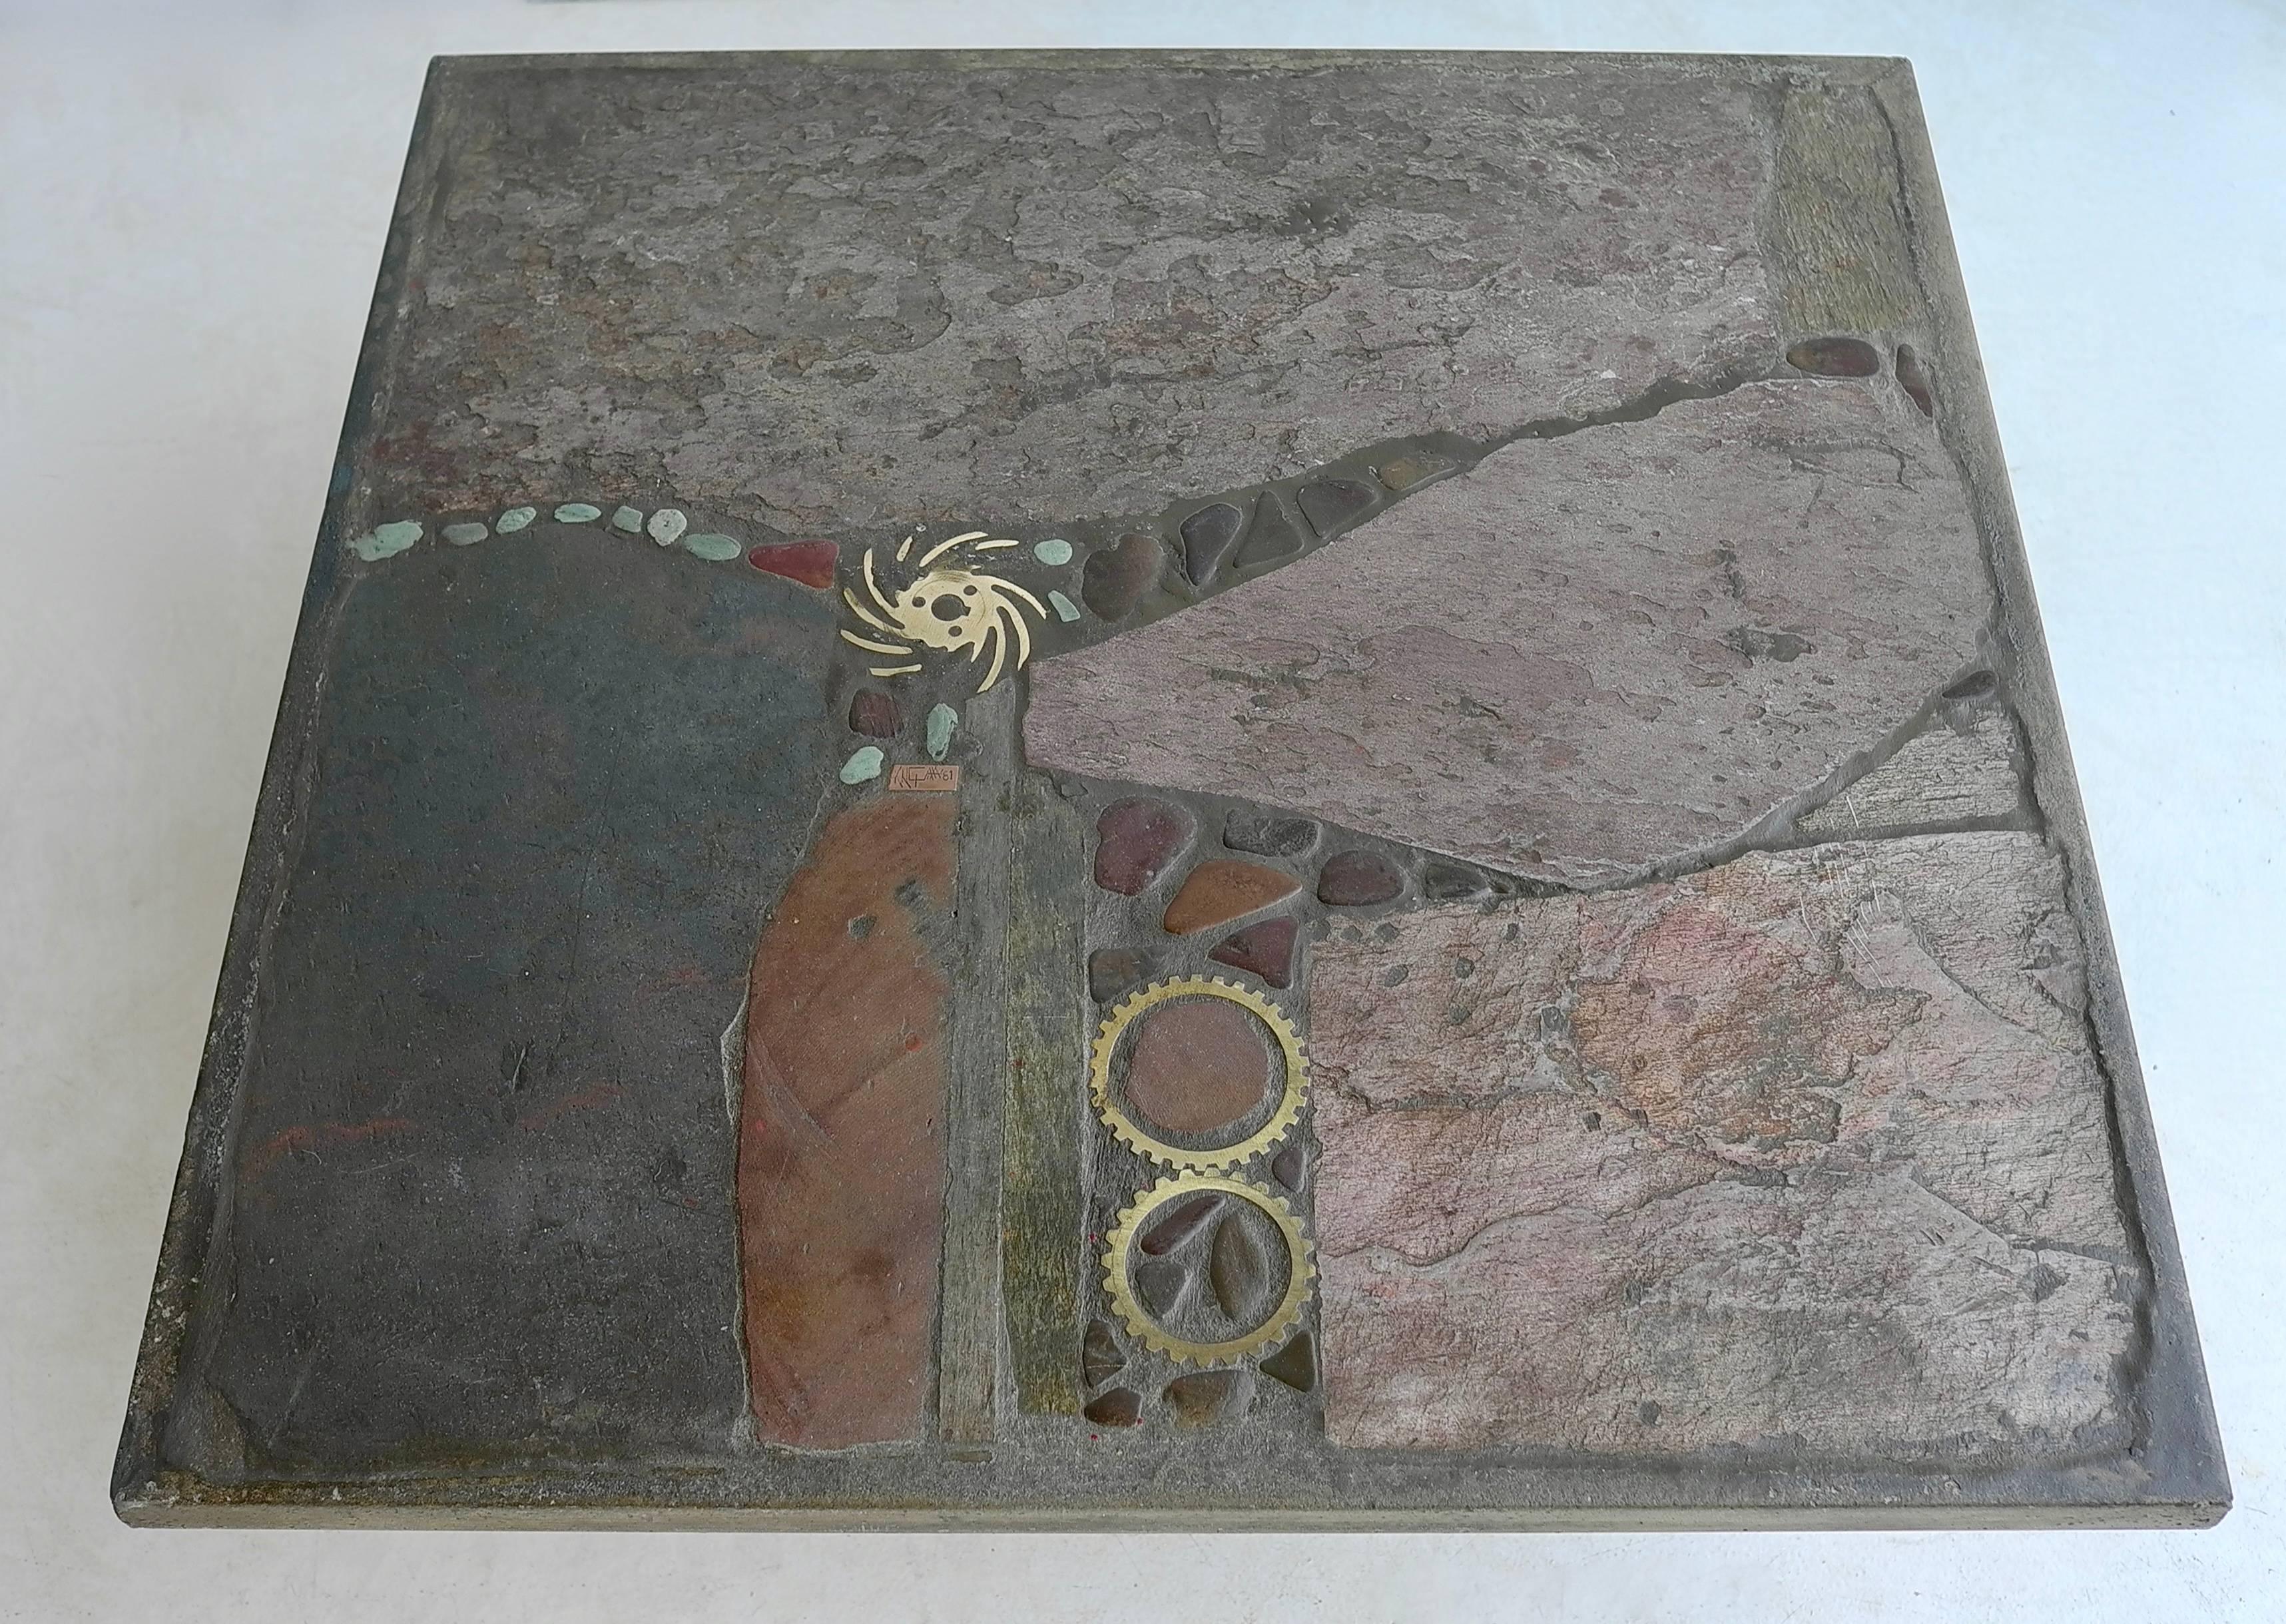 Paul Kingma slate stone and brass art table. This is a one off unique early piece made of anthracite, green en red, brown and turquoise stone and brass details, Signed by the artist in brass Paul Kingma 1981.